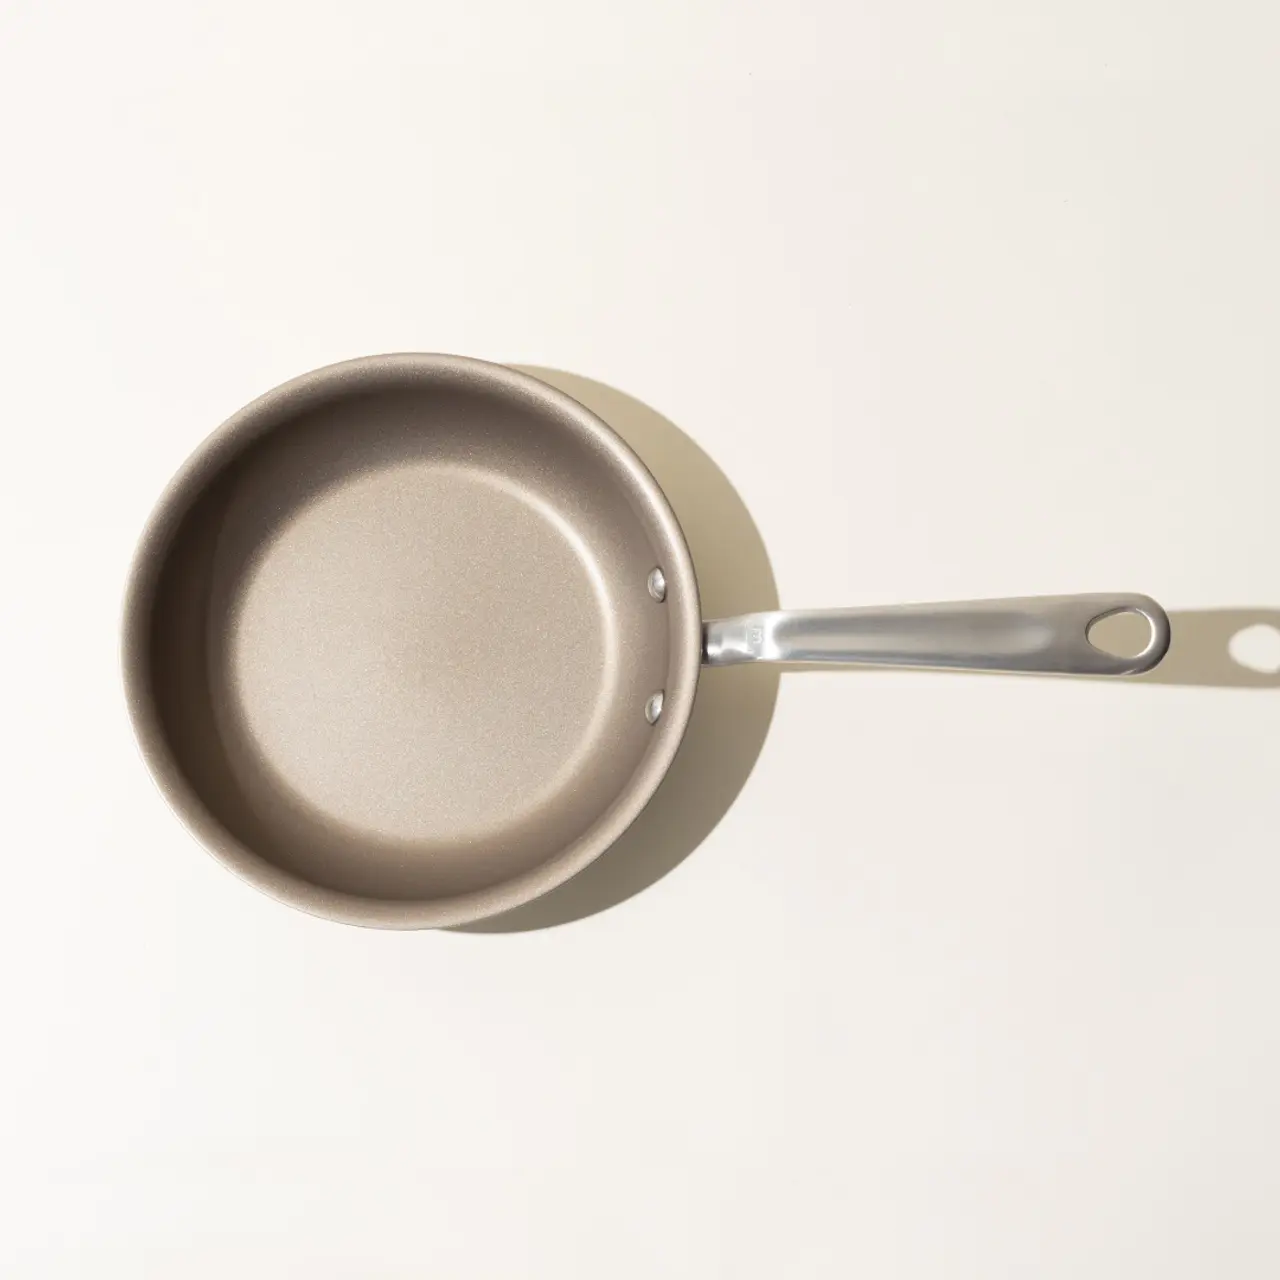 A new non-stick frying pan with a silver handle viewed from above on a light background.